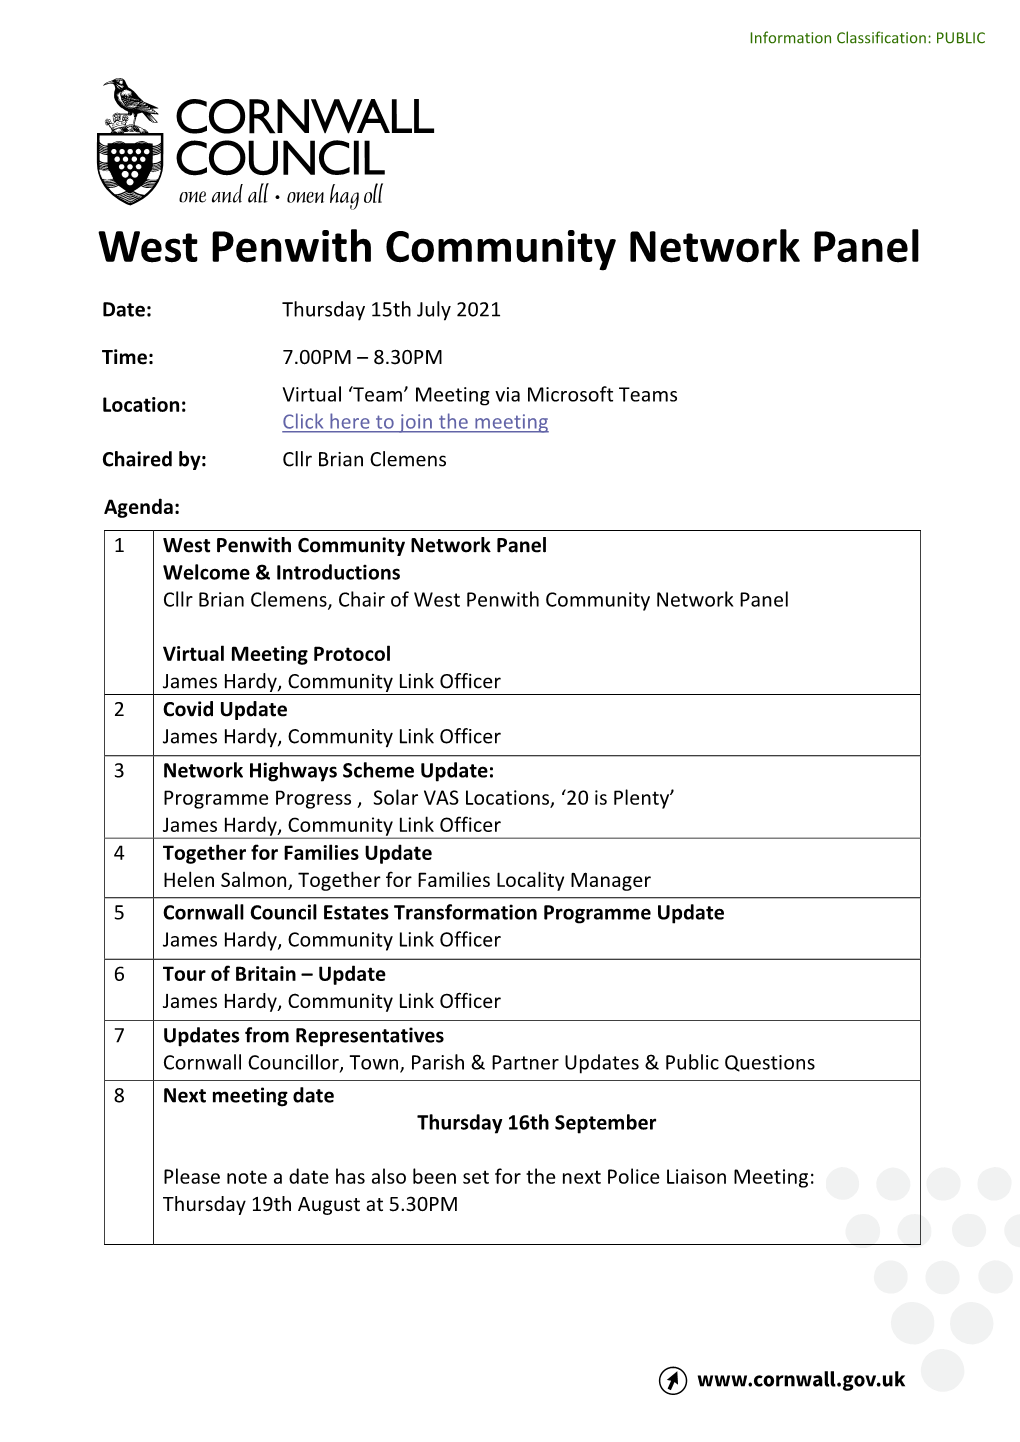 West Penwith Community Network Panel